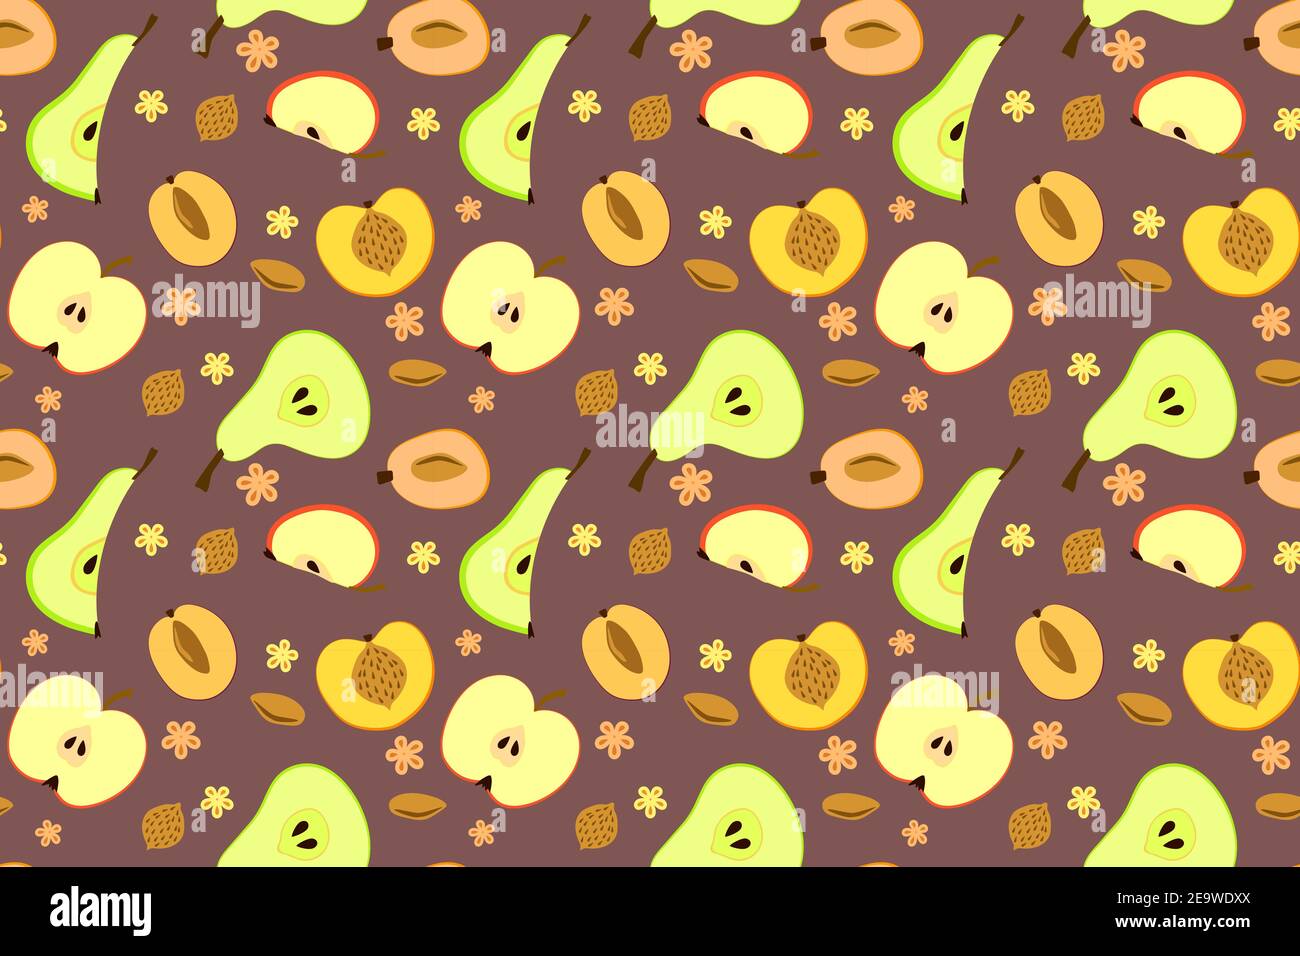 Fresh fruit slices seamless vector pattern. Apples, pears, apricots and peaches fabric background Stock Vector